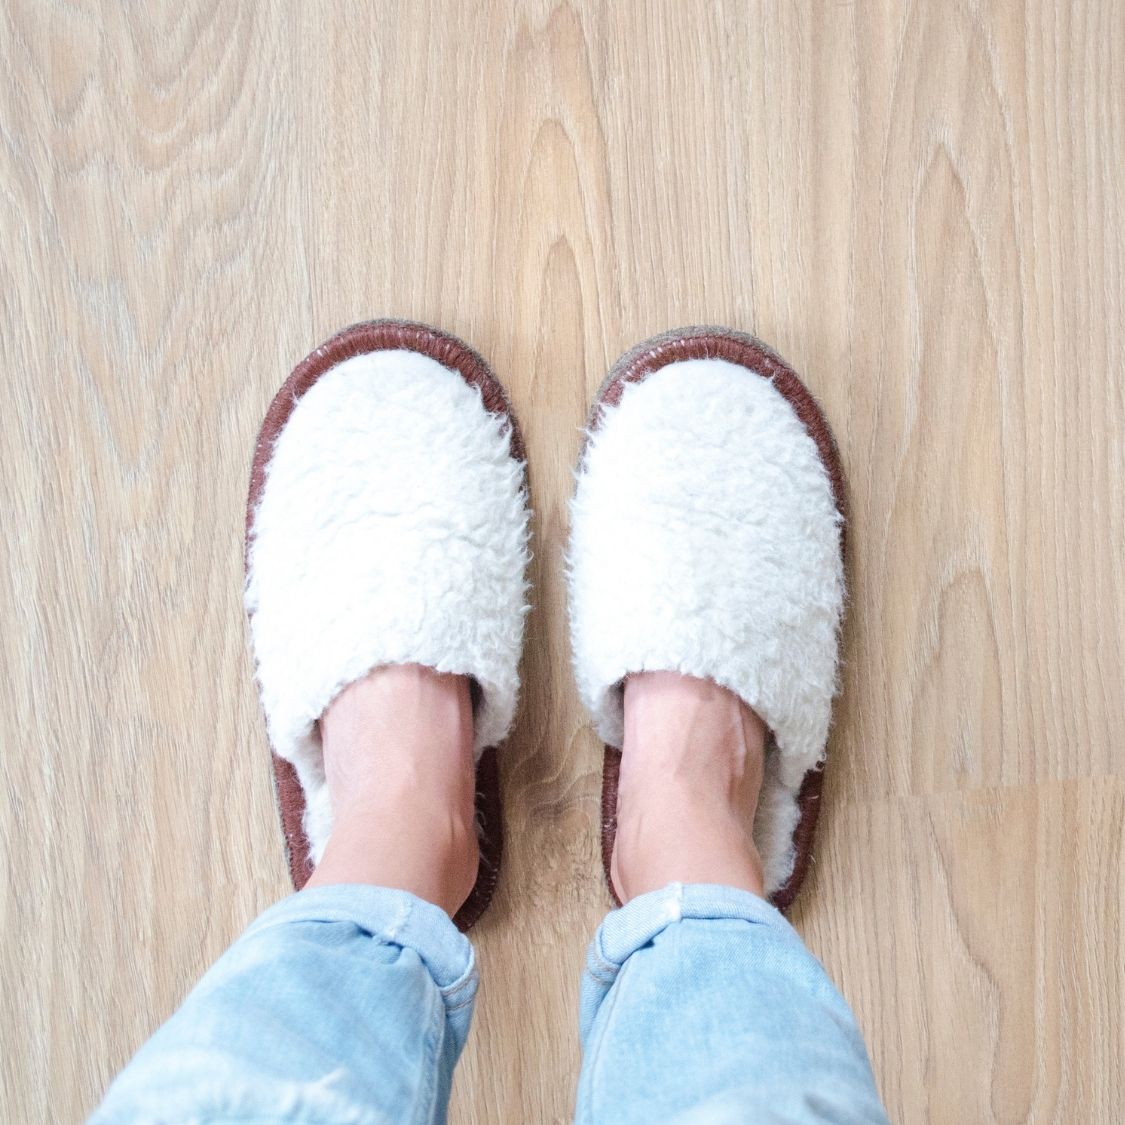 Ways To Keep Your Feet Warm on Cool Days